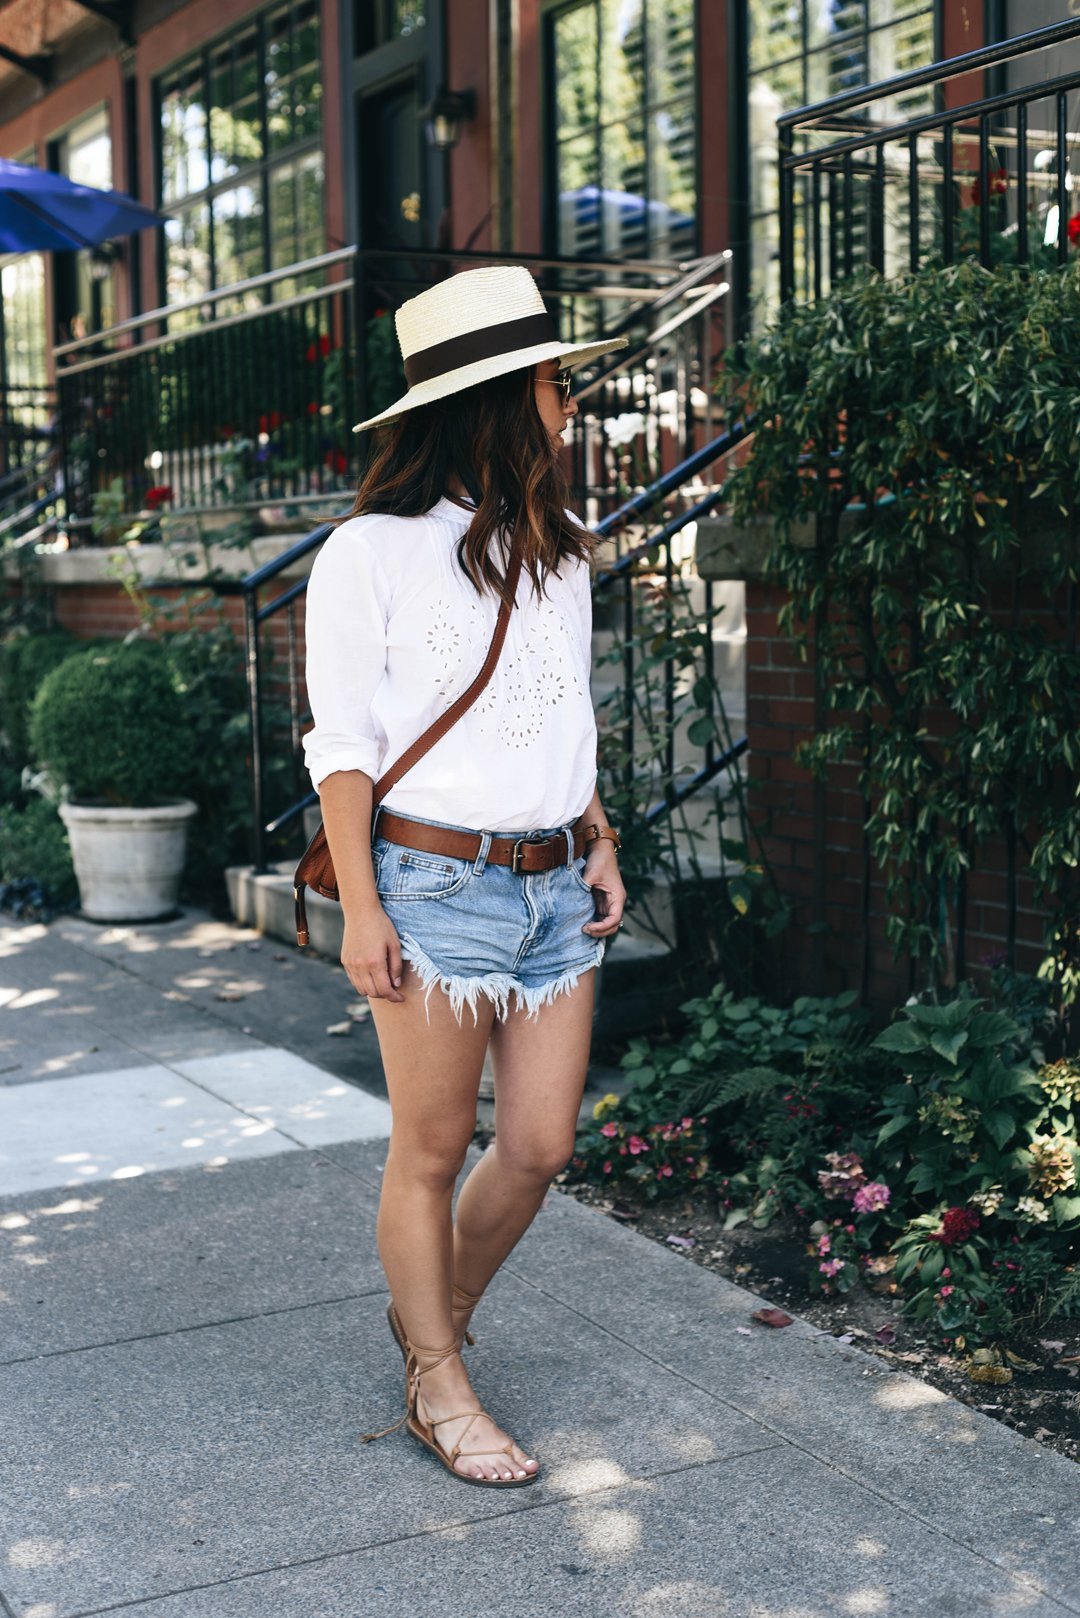 Crystalin Marie wearing Madewell lace up sandals